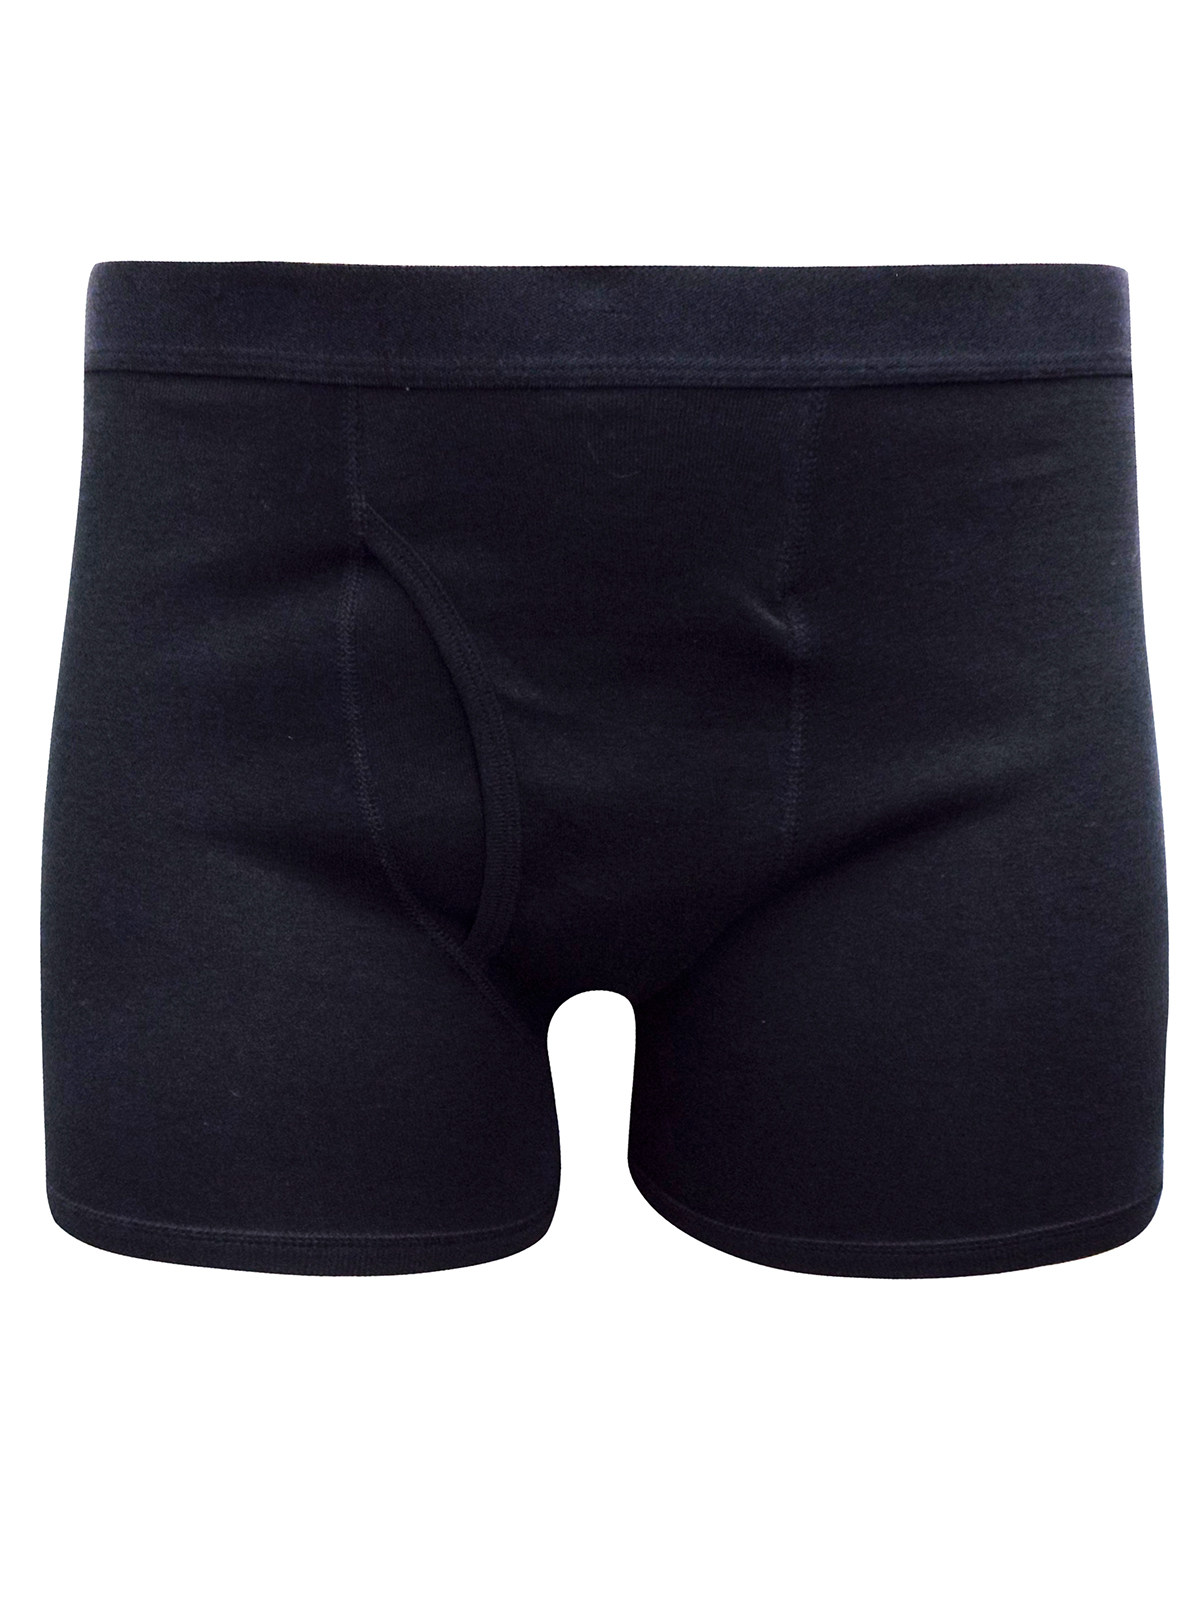 Marks and Spencer - - M&5 BLACK Pure Cotton Cool & Fresh Trunks - Size ...